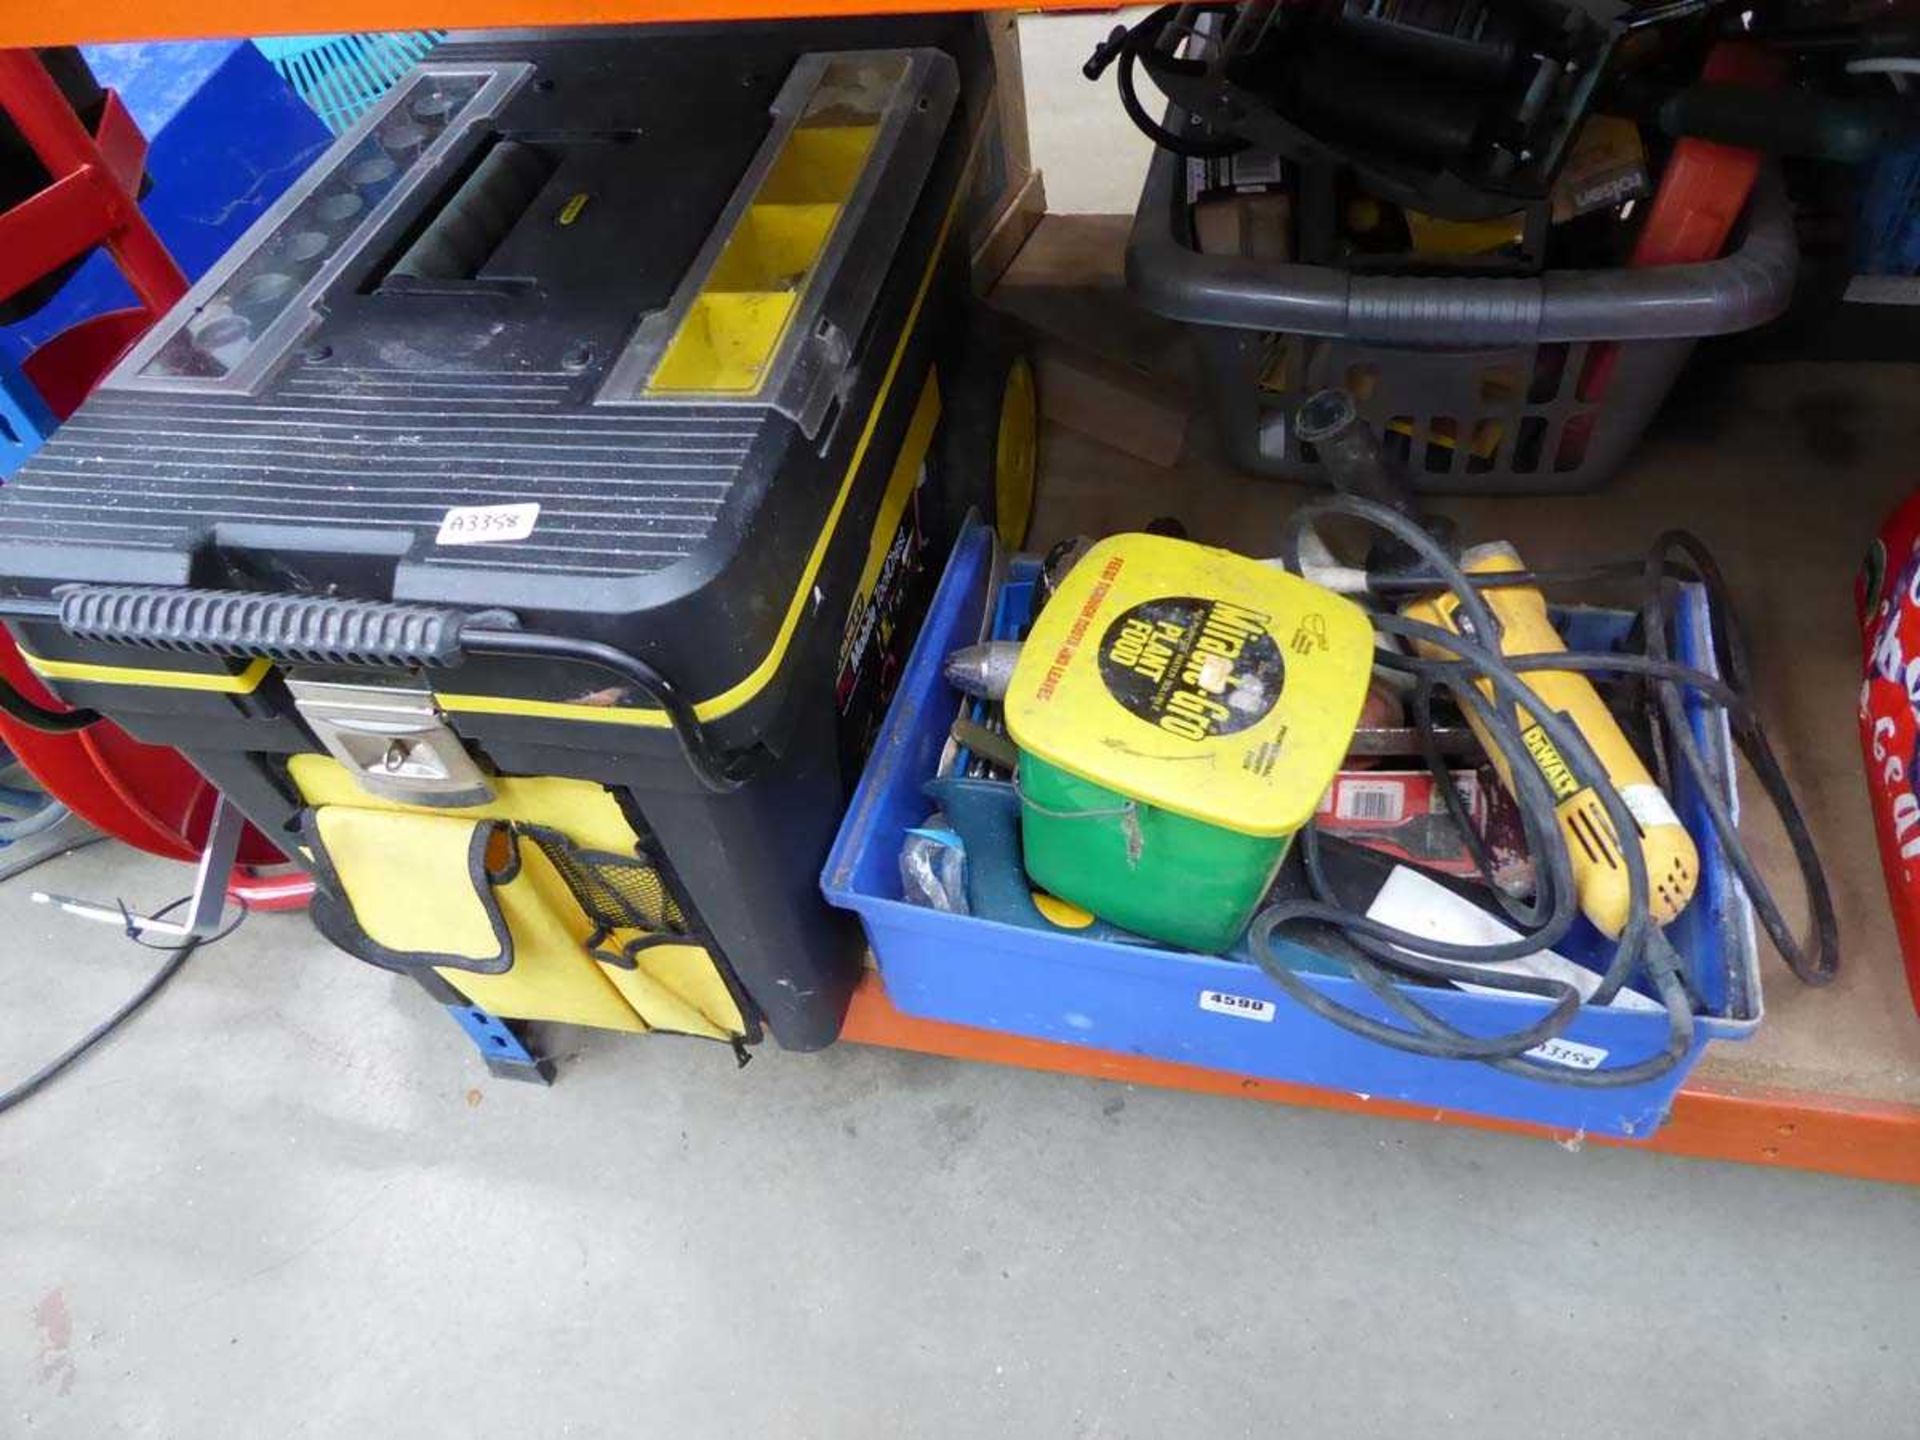 Stanley pro mobile tool chest and crate of assorted tools inc, Dewalt grinder, drill bits etc.